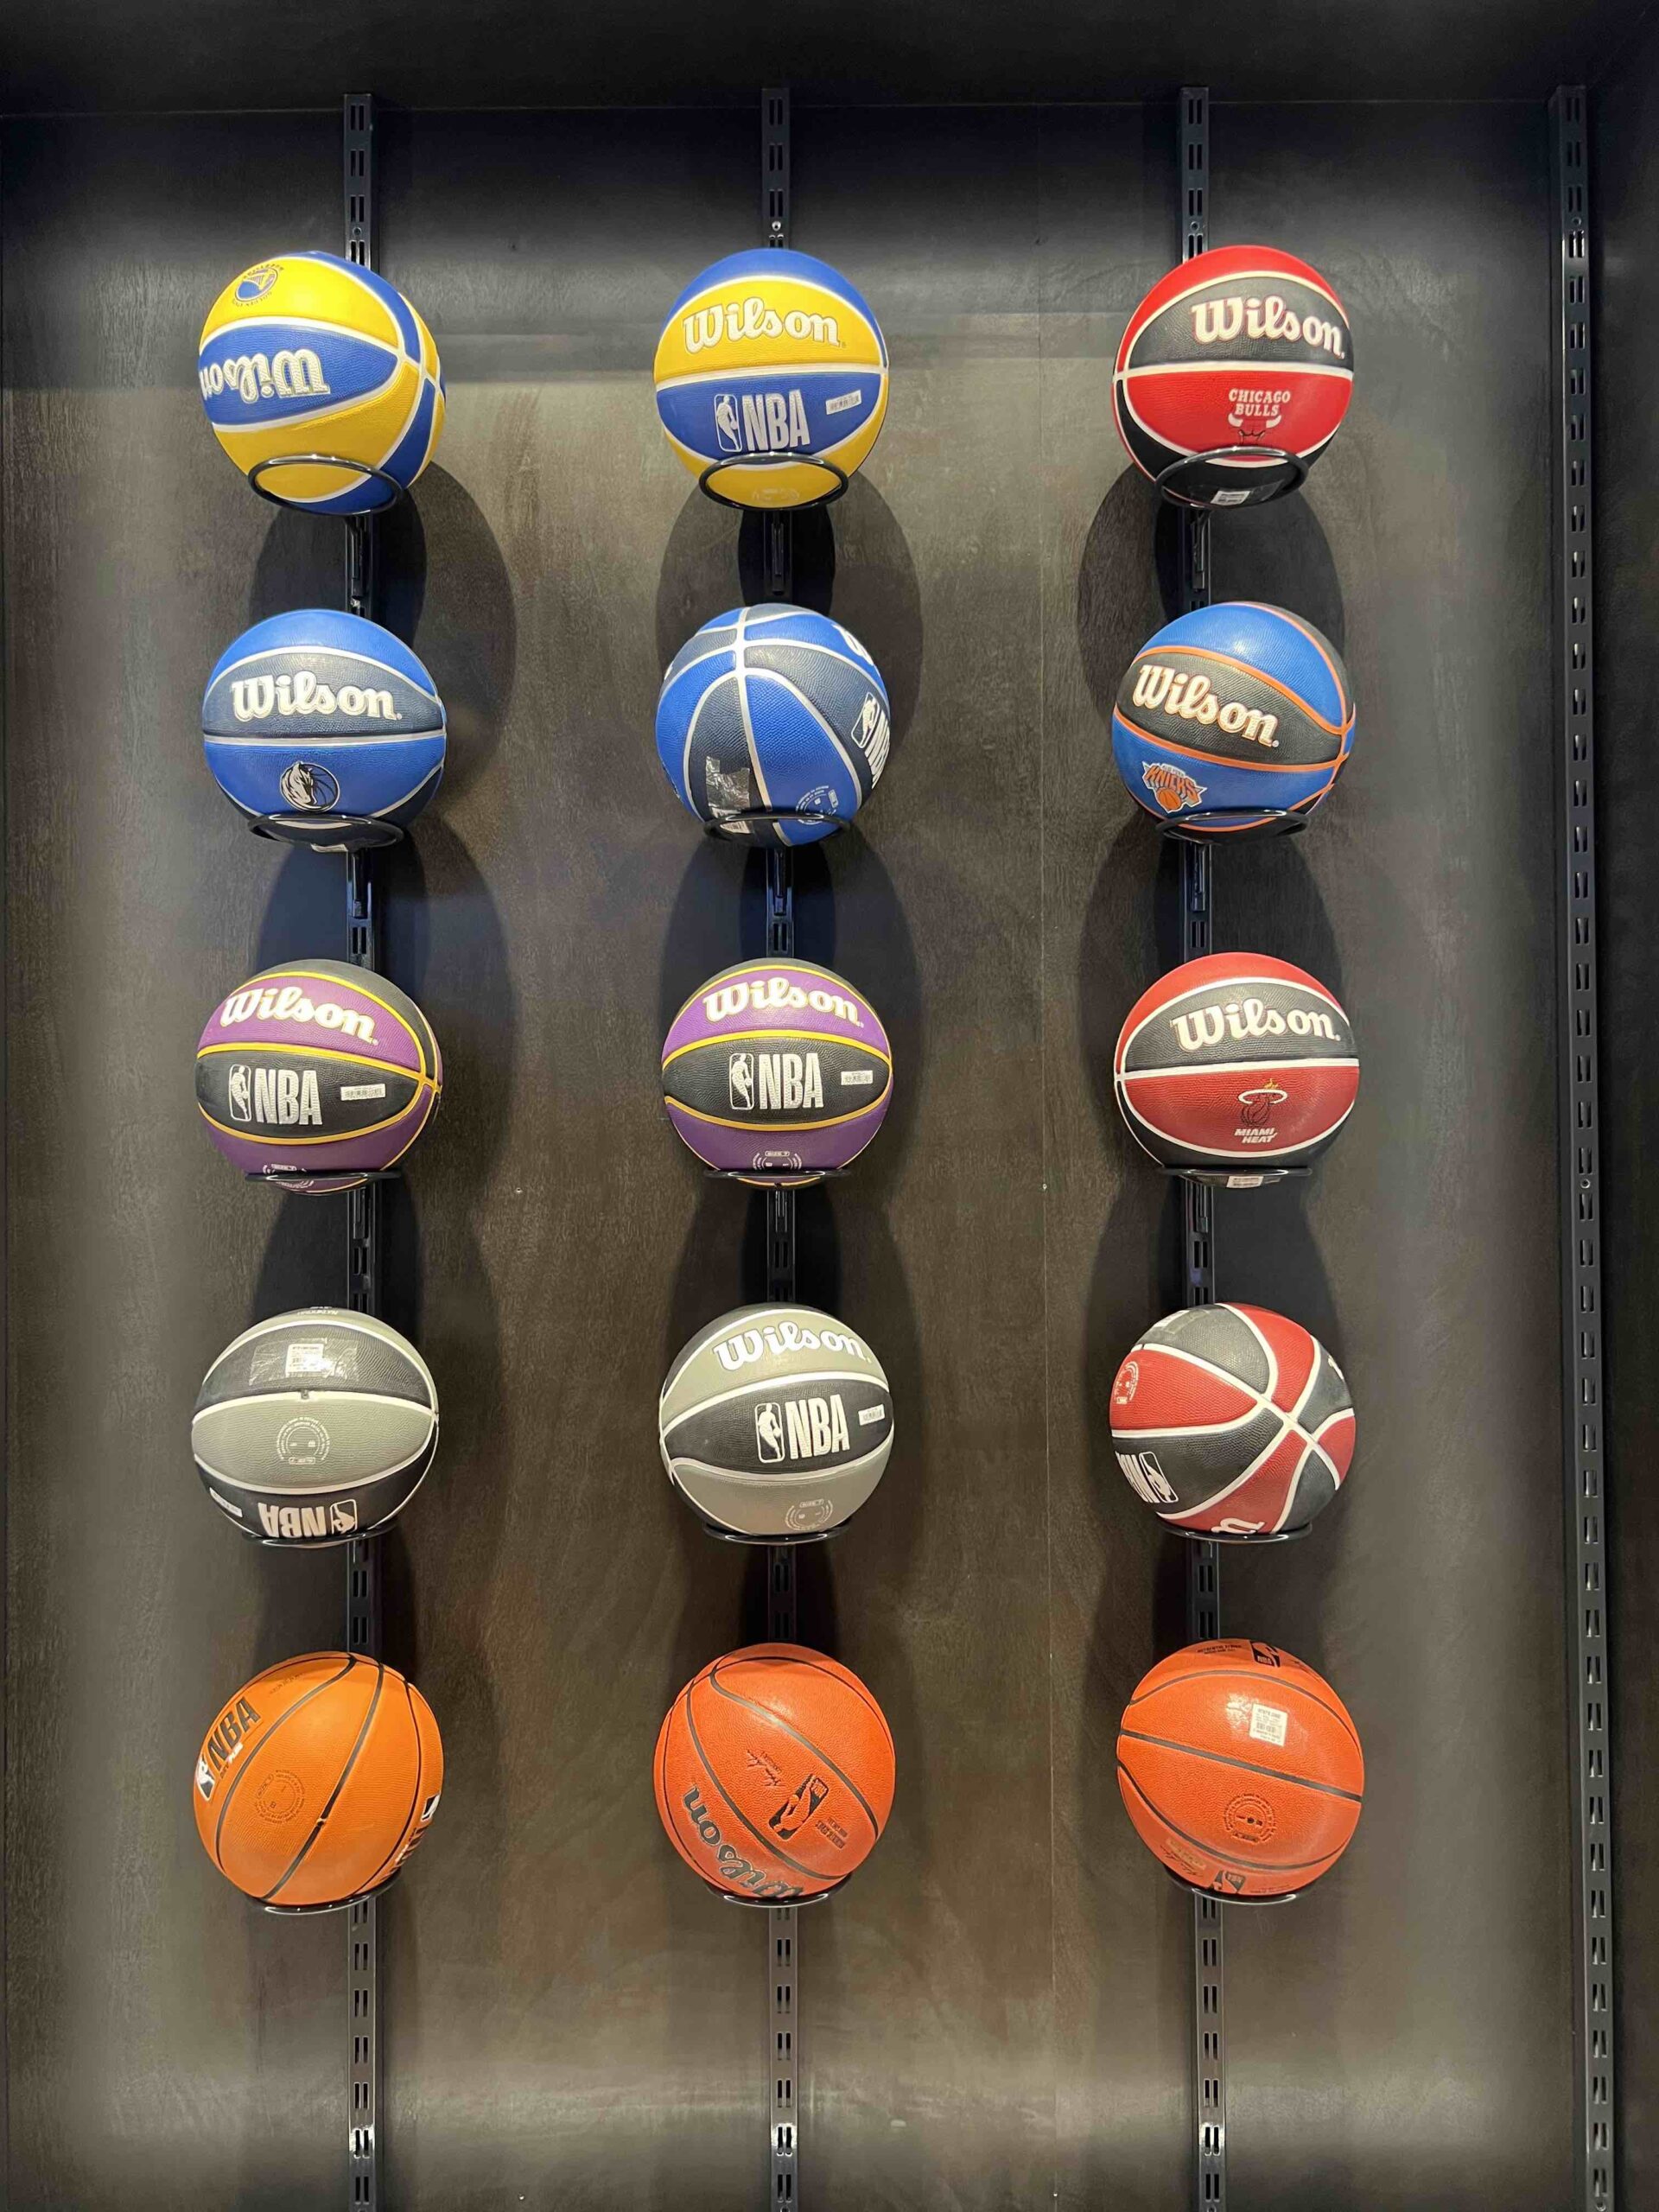 There are many choices for hoopers in the new NBA store in the Philippines.